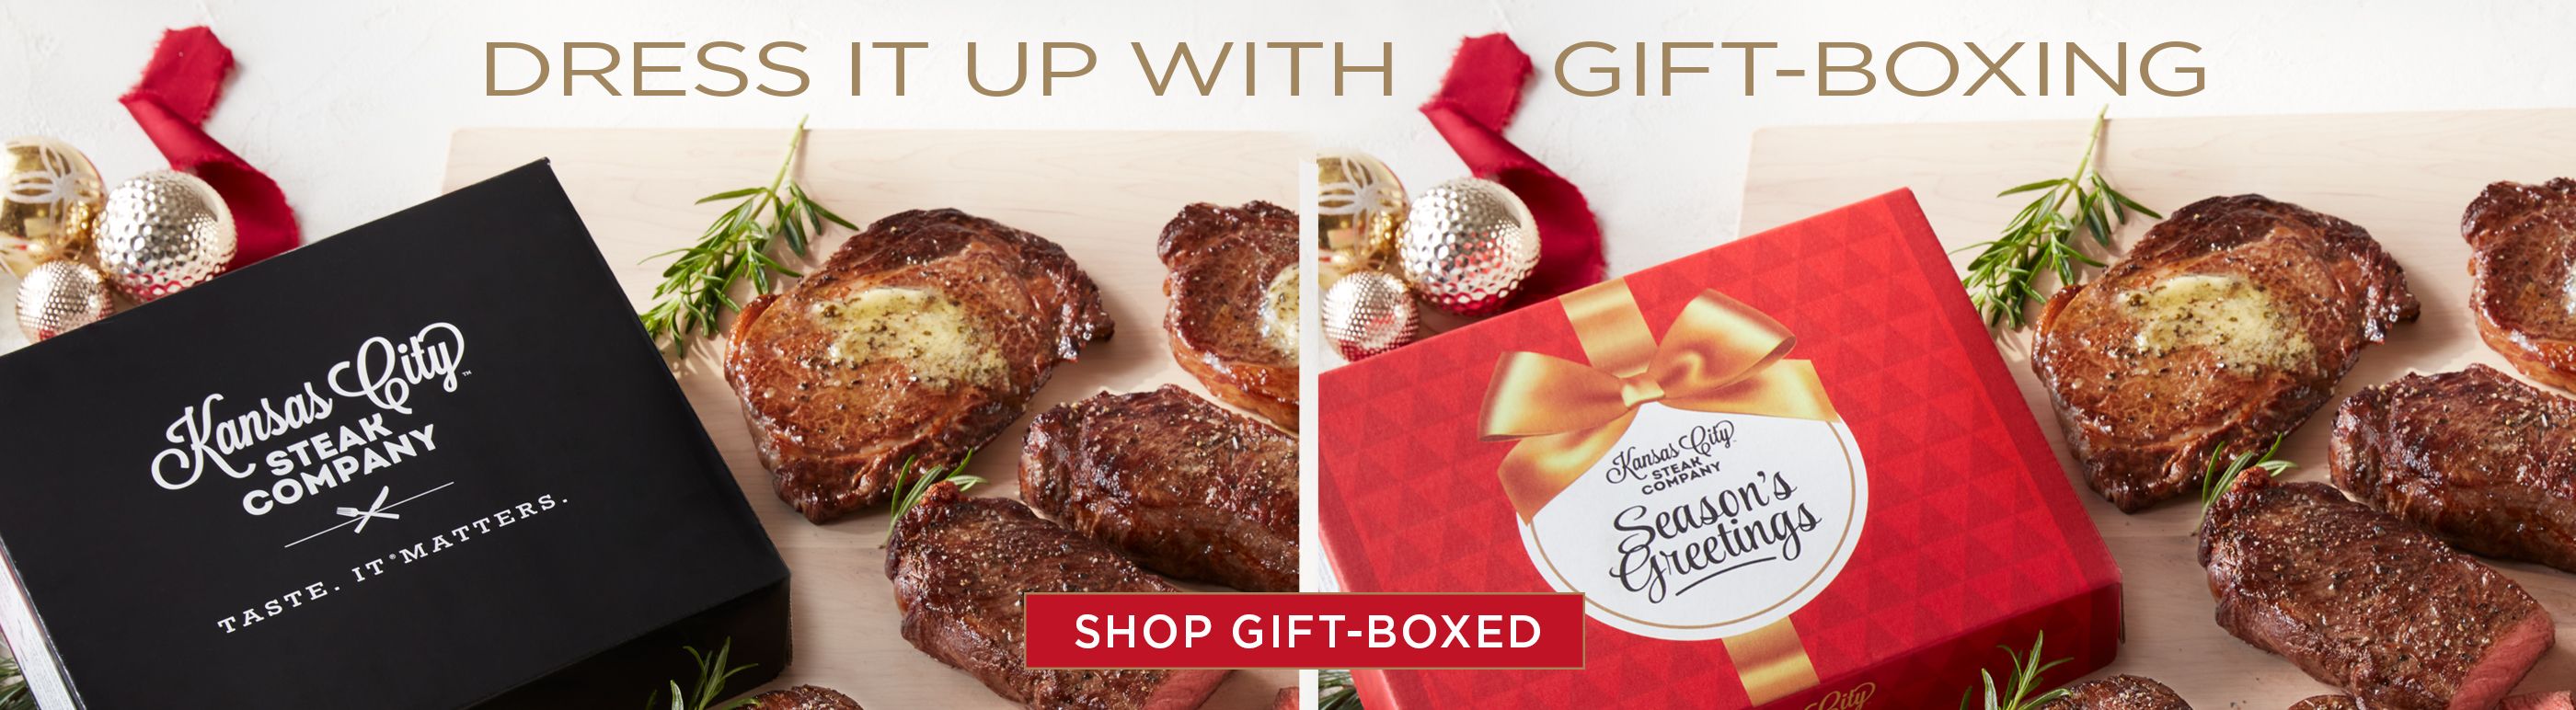 Dress it up with gift-boxing.